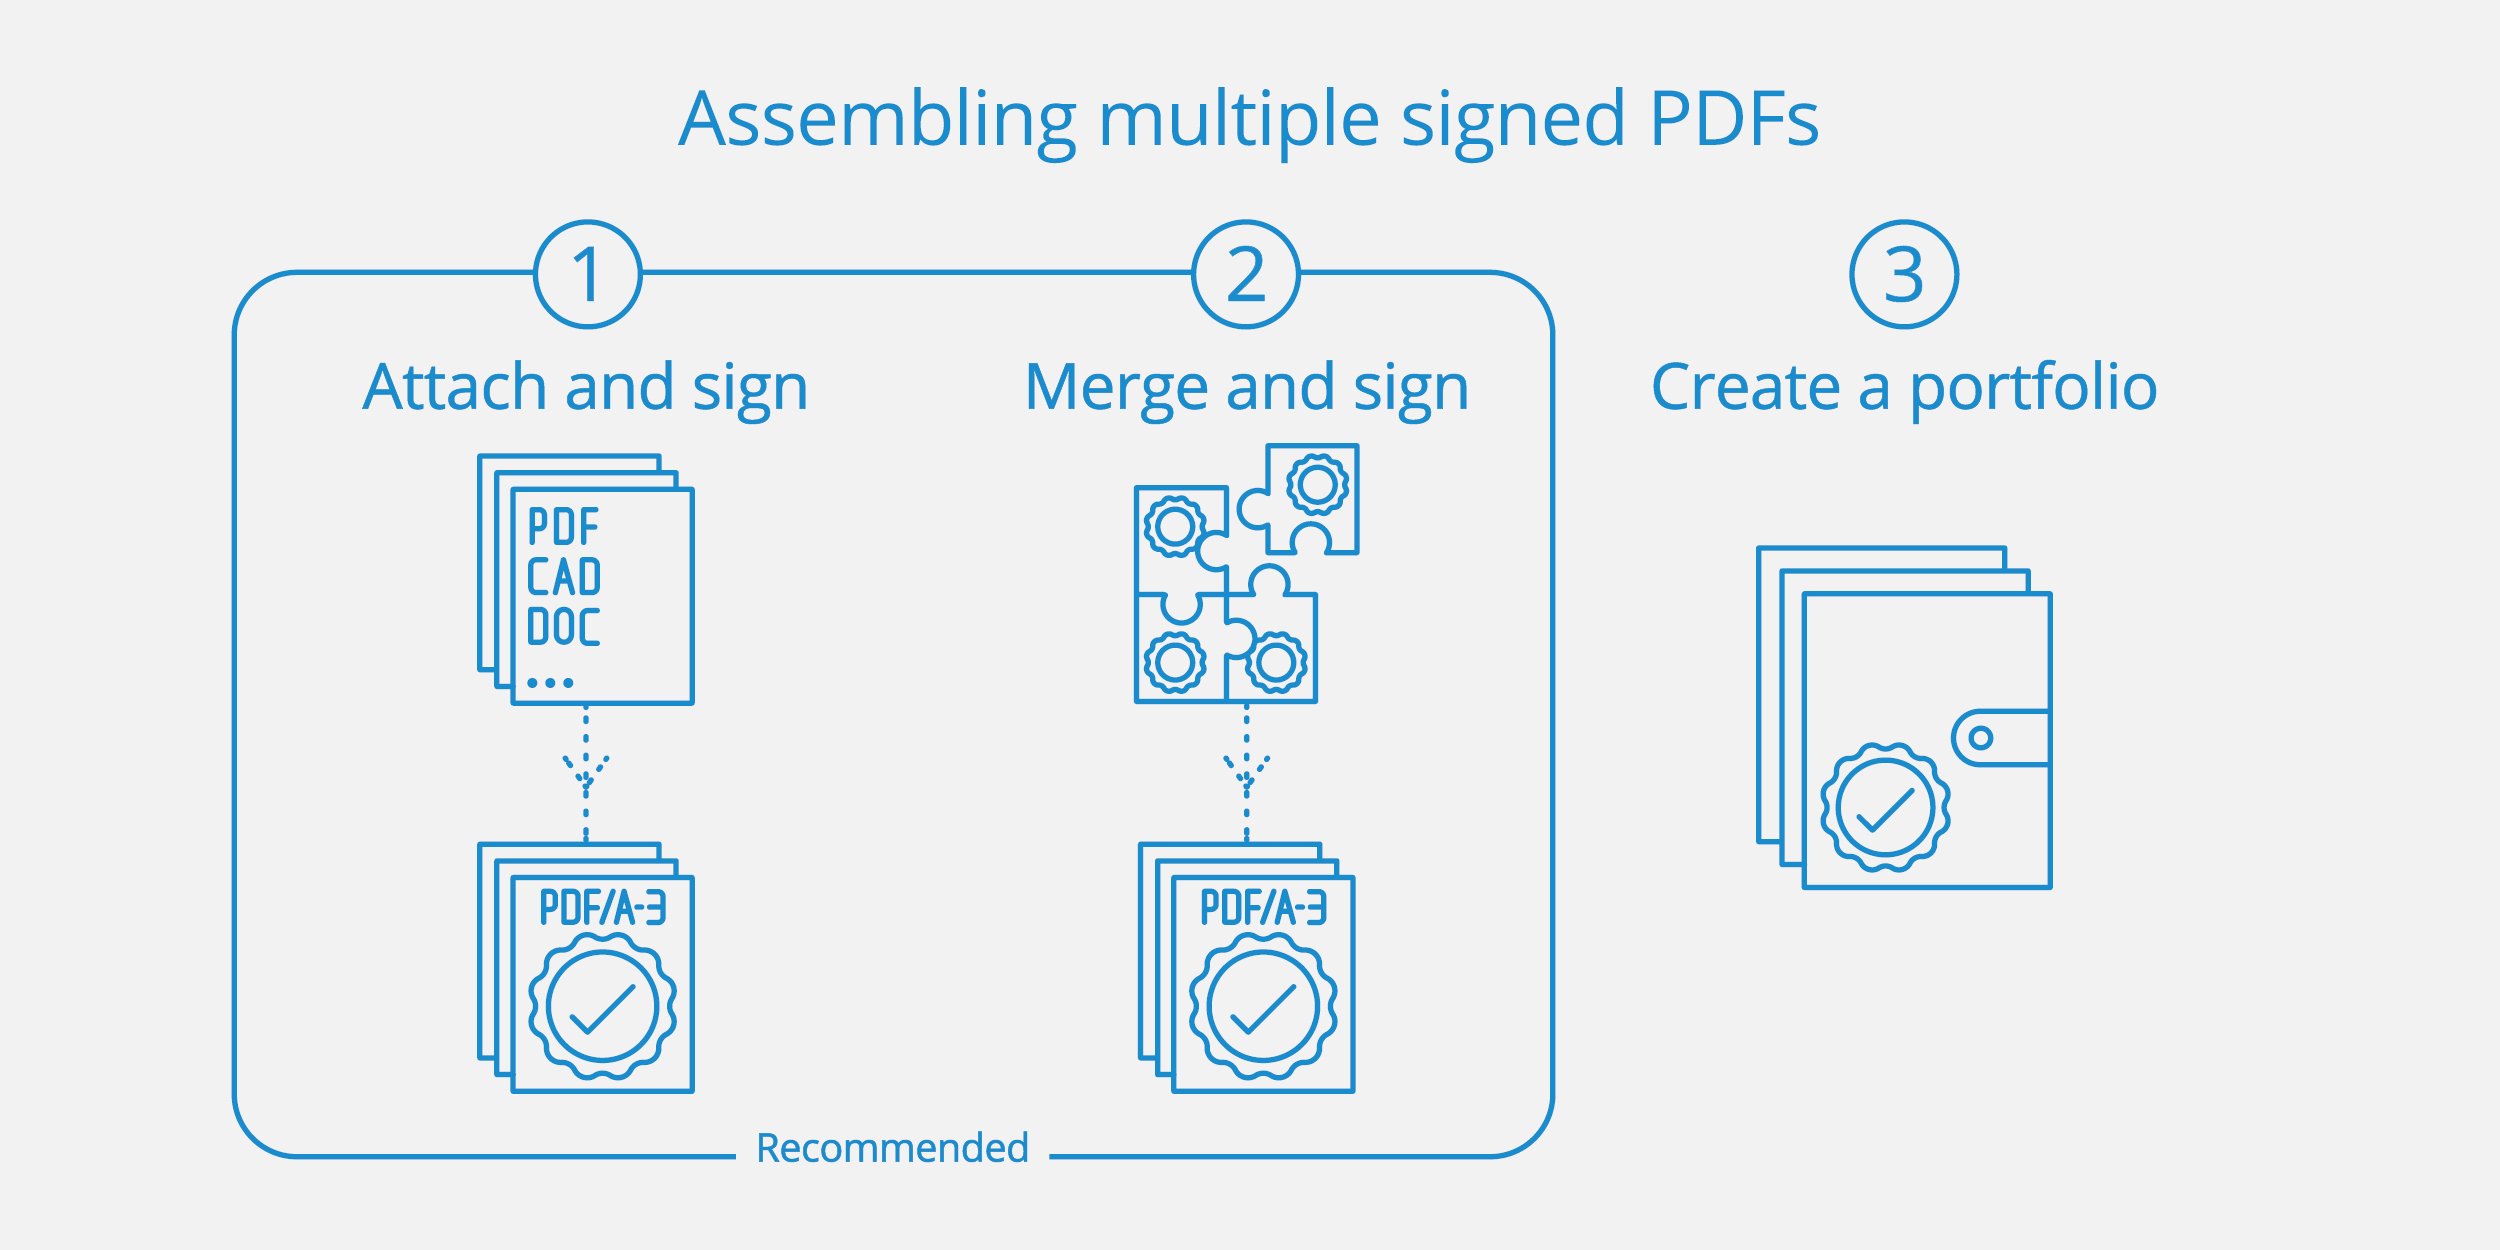 Assembling multiples signed PDFs